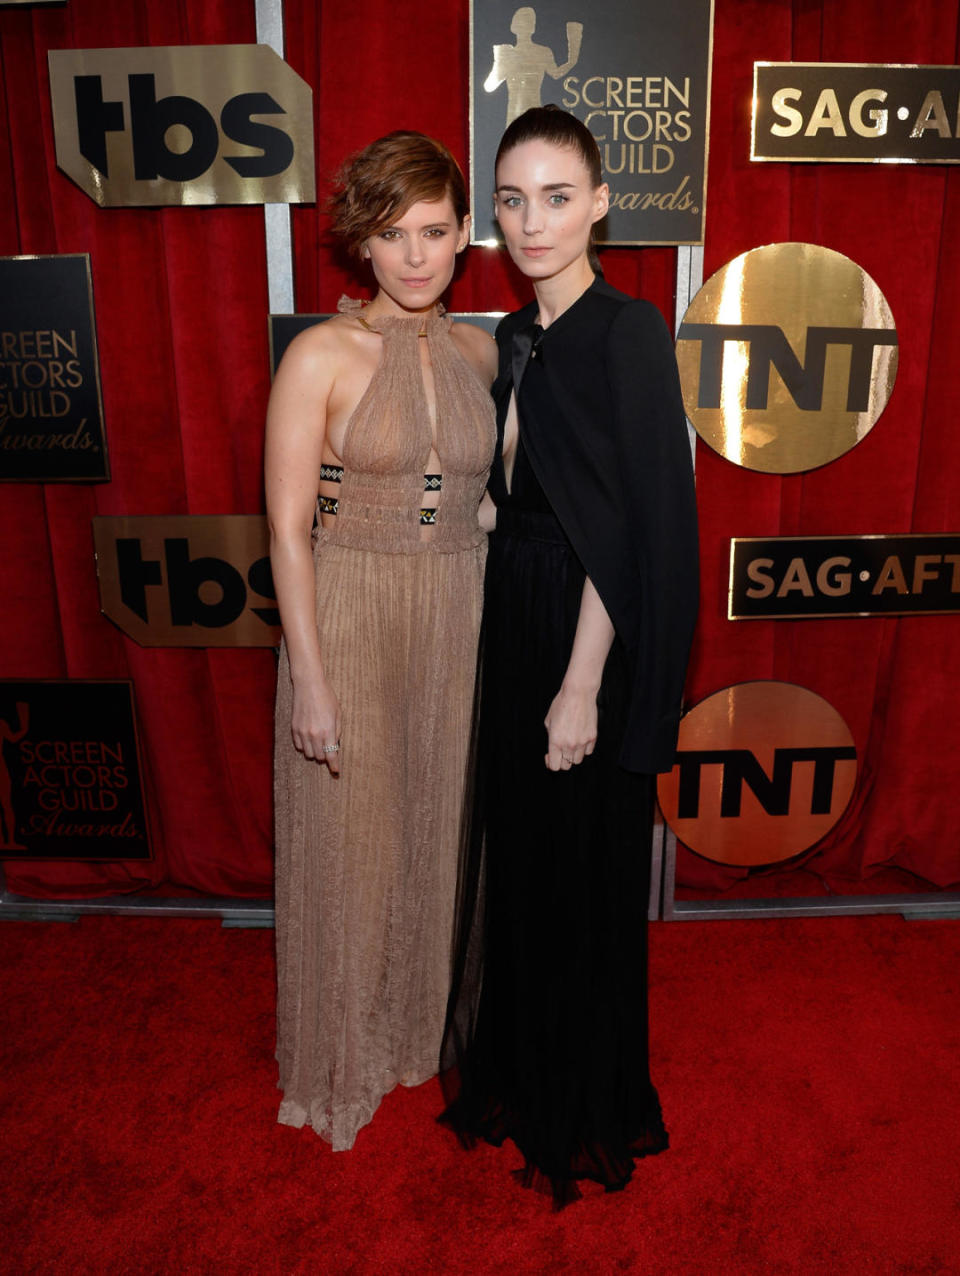 Kate Mara and Rooney Mara — both in Valentino — at the 22nd Annual Screen Actors Guild Awards at The Shrine Auditorium on January 30, 2016 in Los Angeles, California.